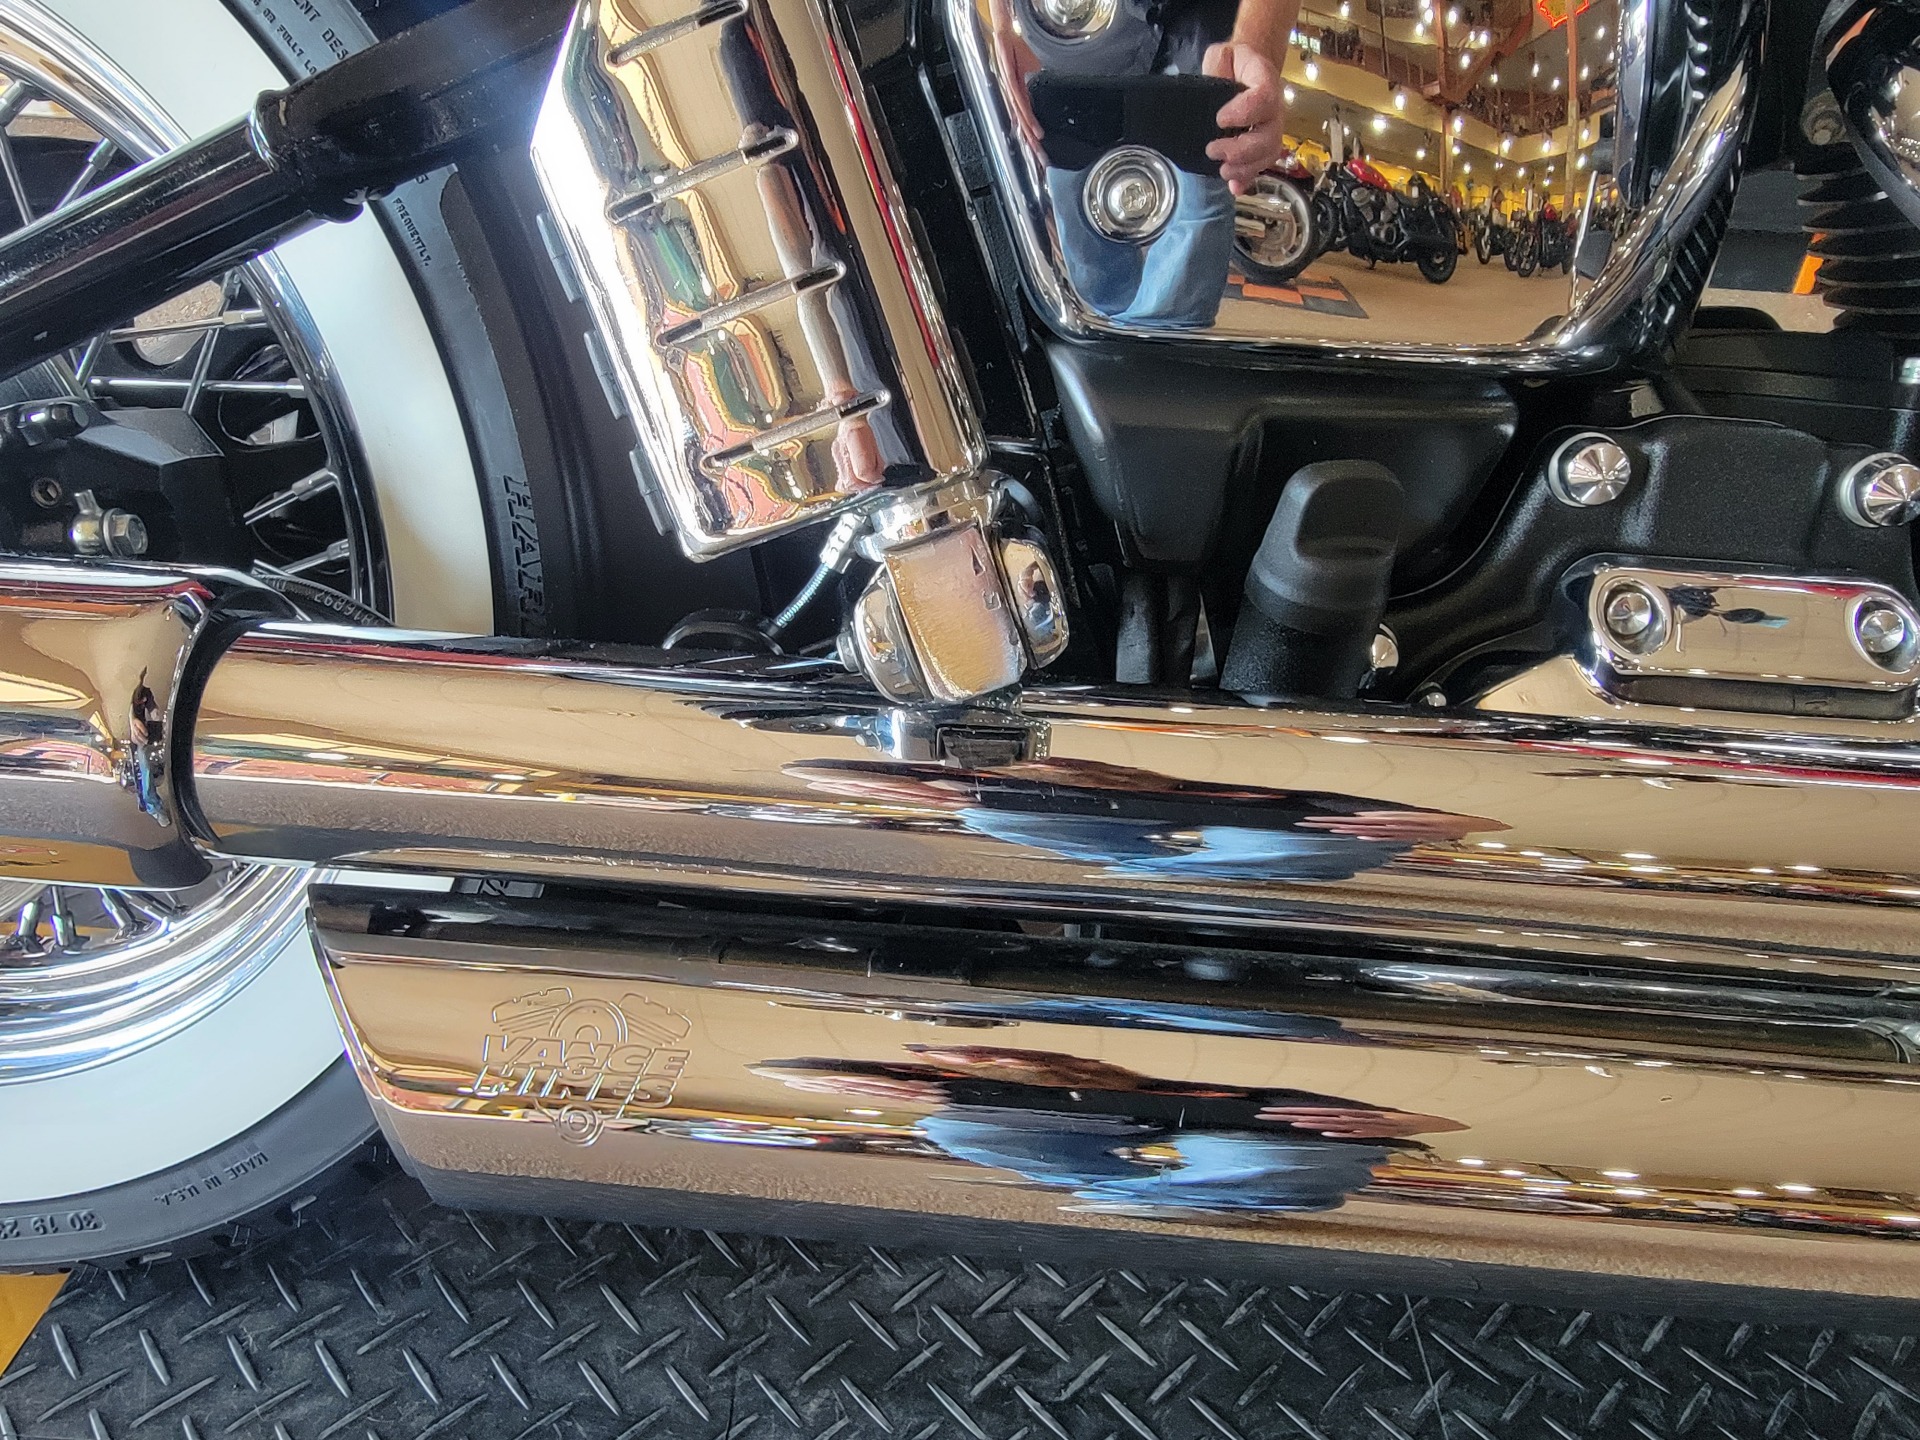 2020 Harley-Davidson SOFTAIL DELUXE in Knoxville, Tennessee - Photo 2